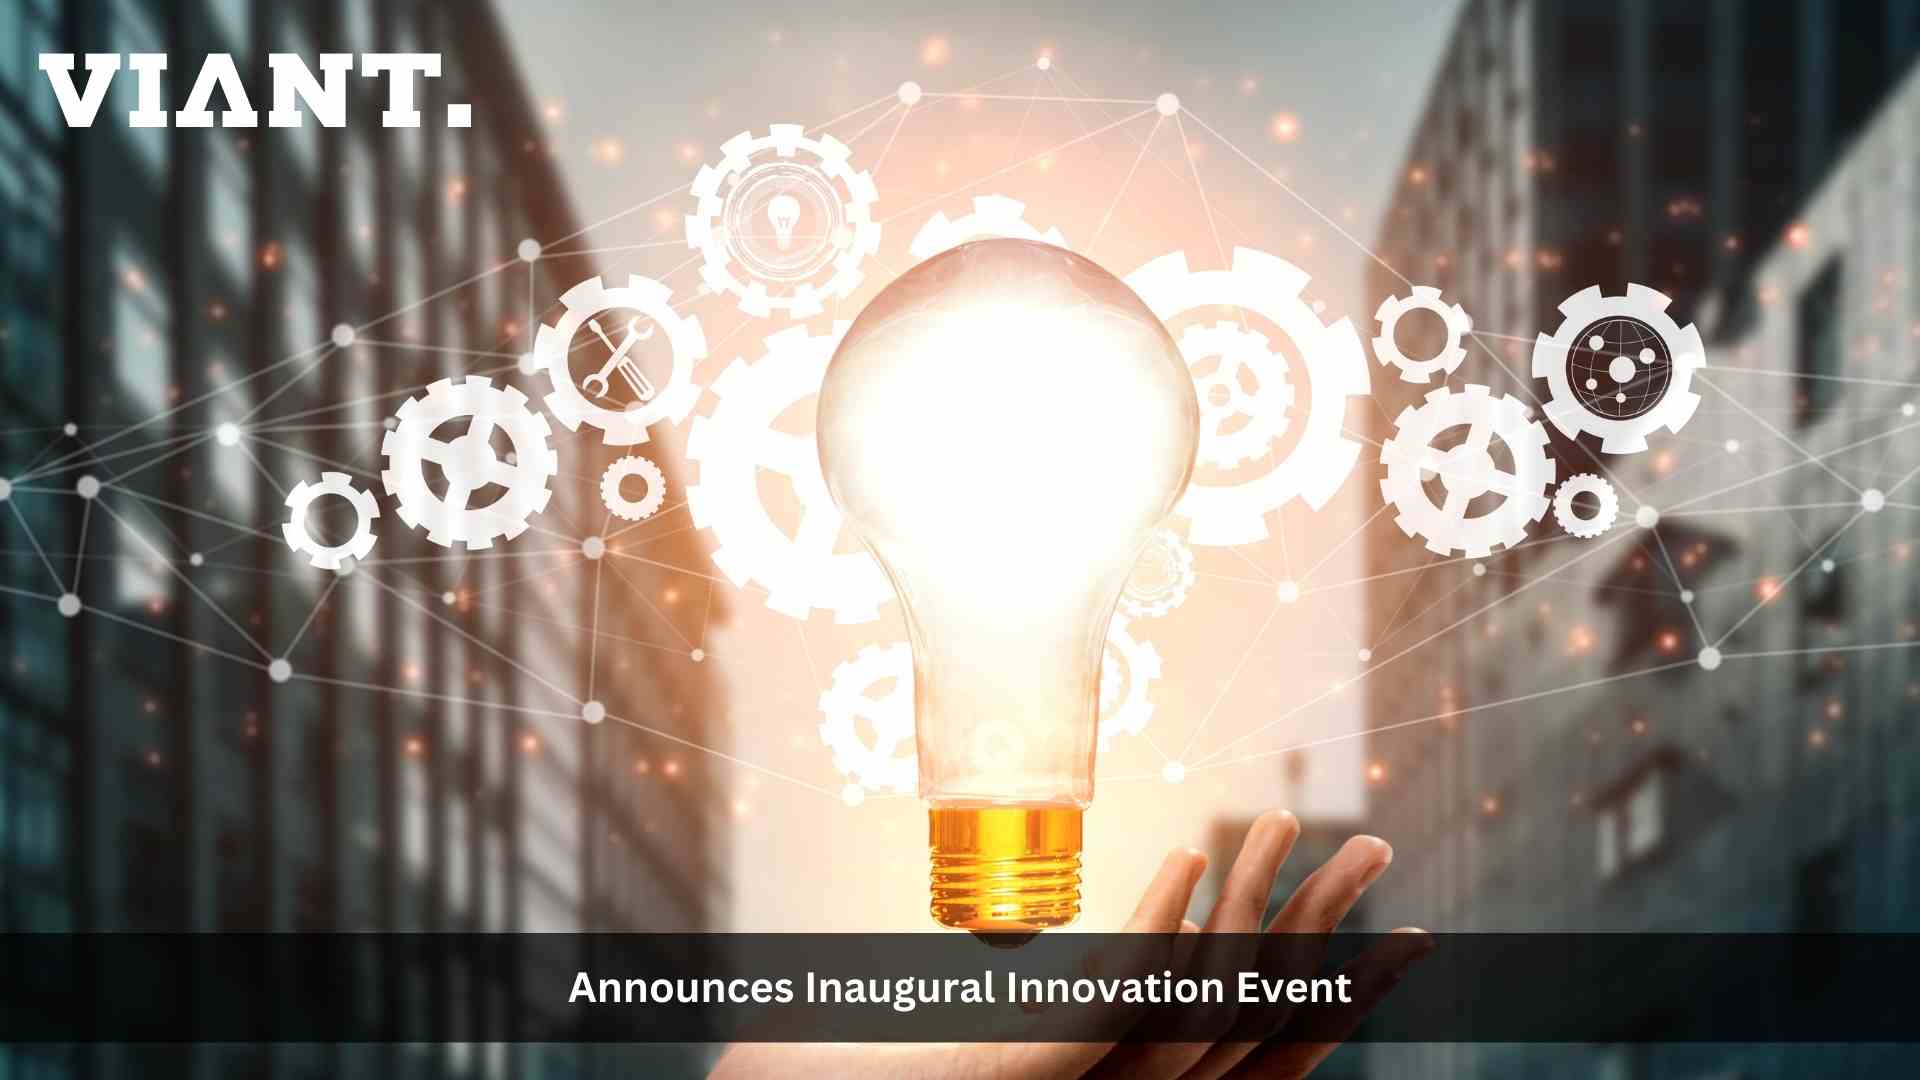 Viant Announces Inaugural Innovation Event